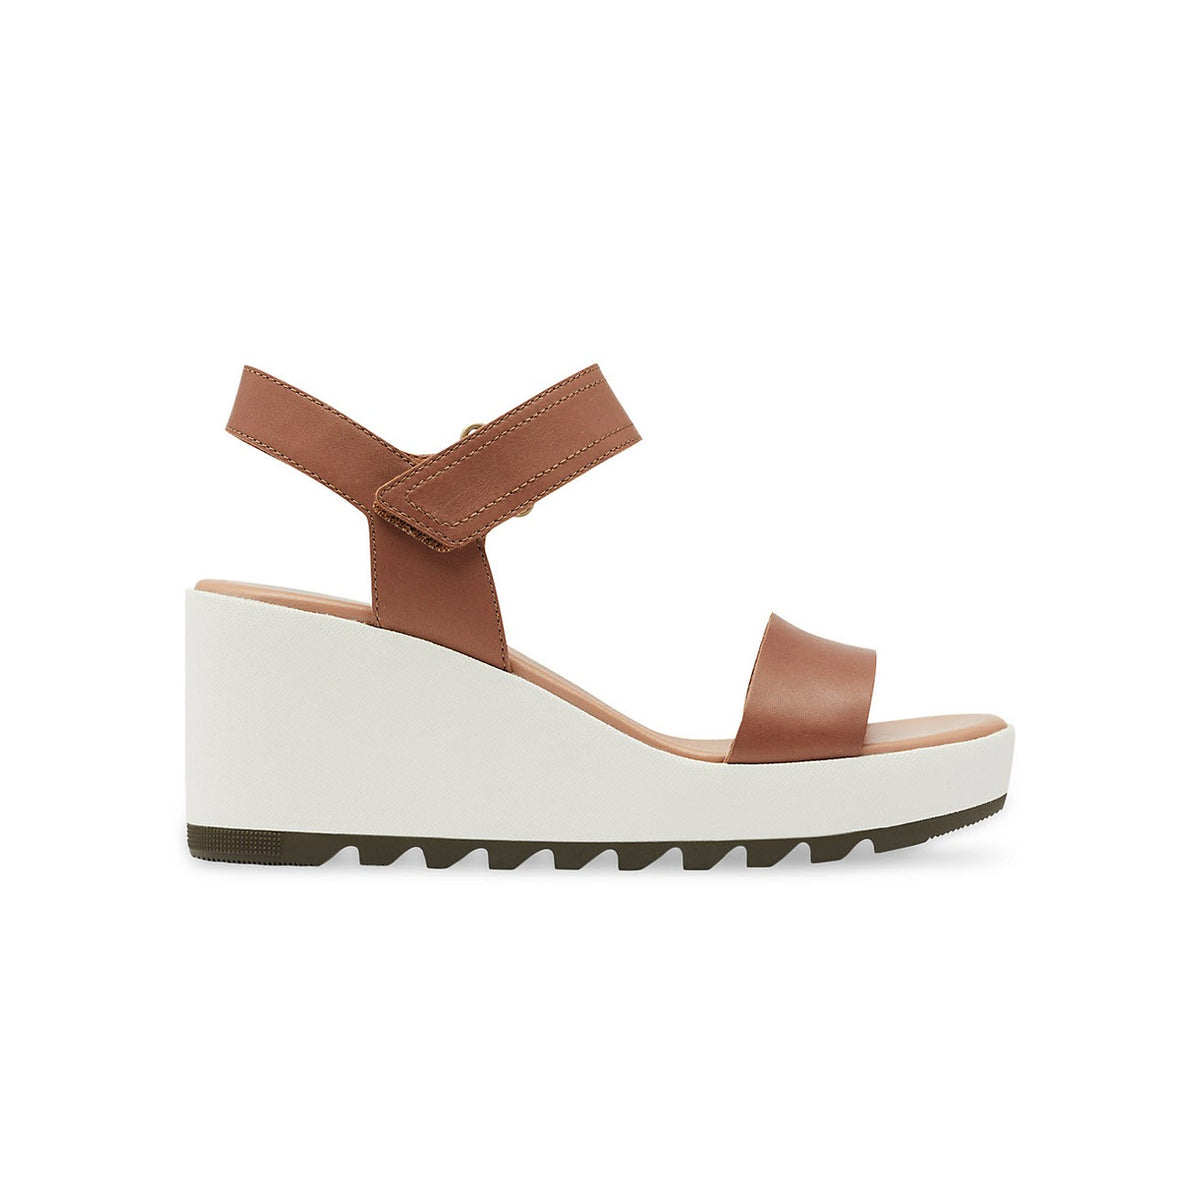 Brown leather strappy sandals with a thick white platform sole and a comfortable EVA footbed, isolated on a white background. - SOREL CAMERON WEDGE SANDAL VELVET TAN - WOMENS by Sorel